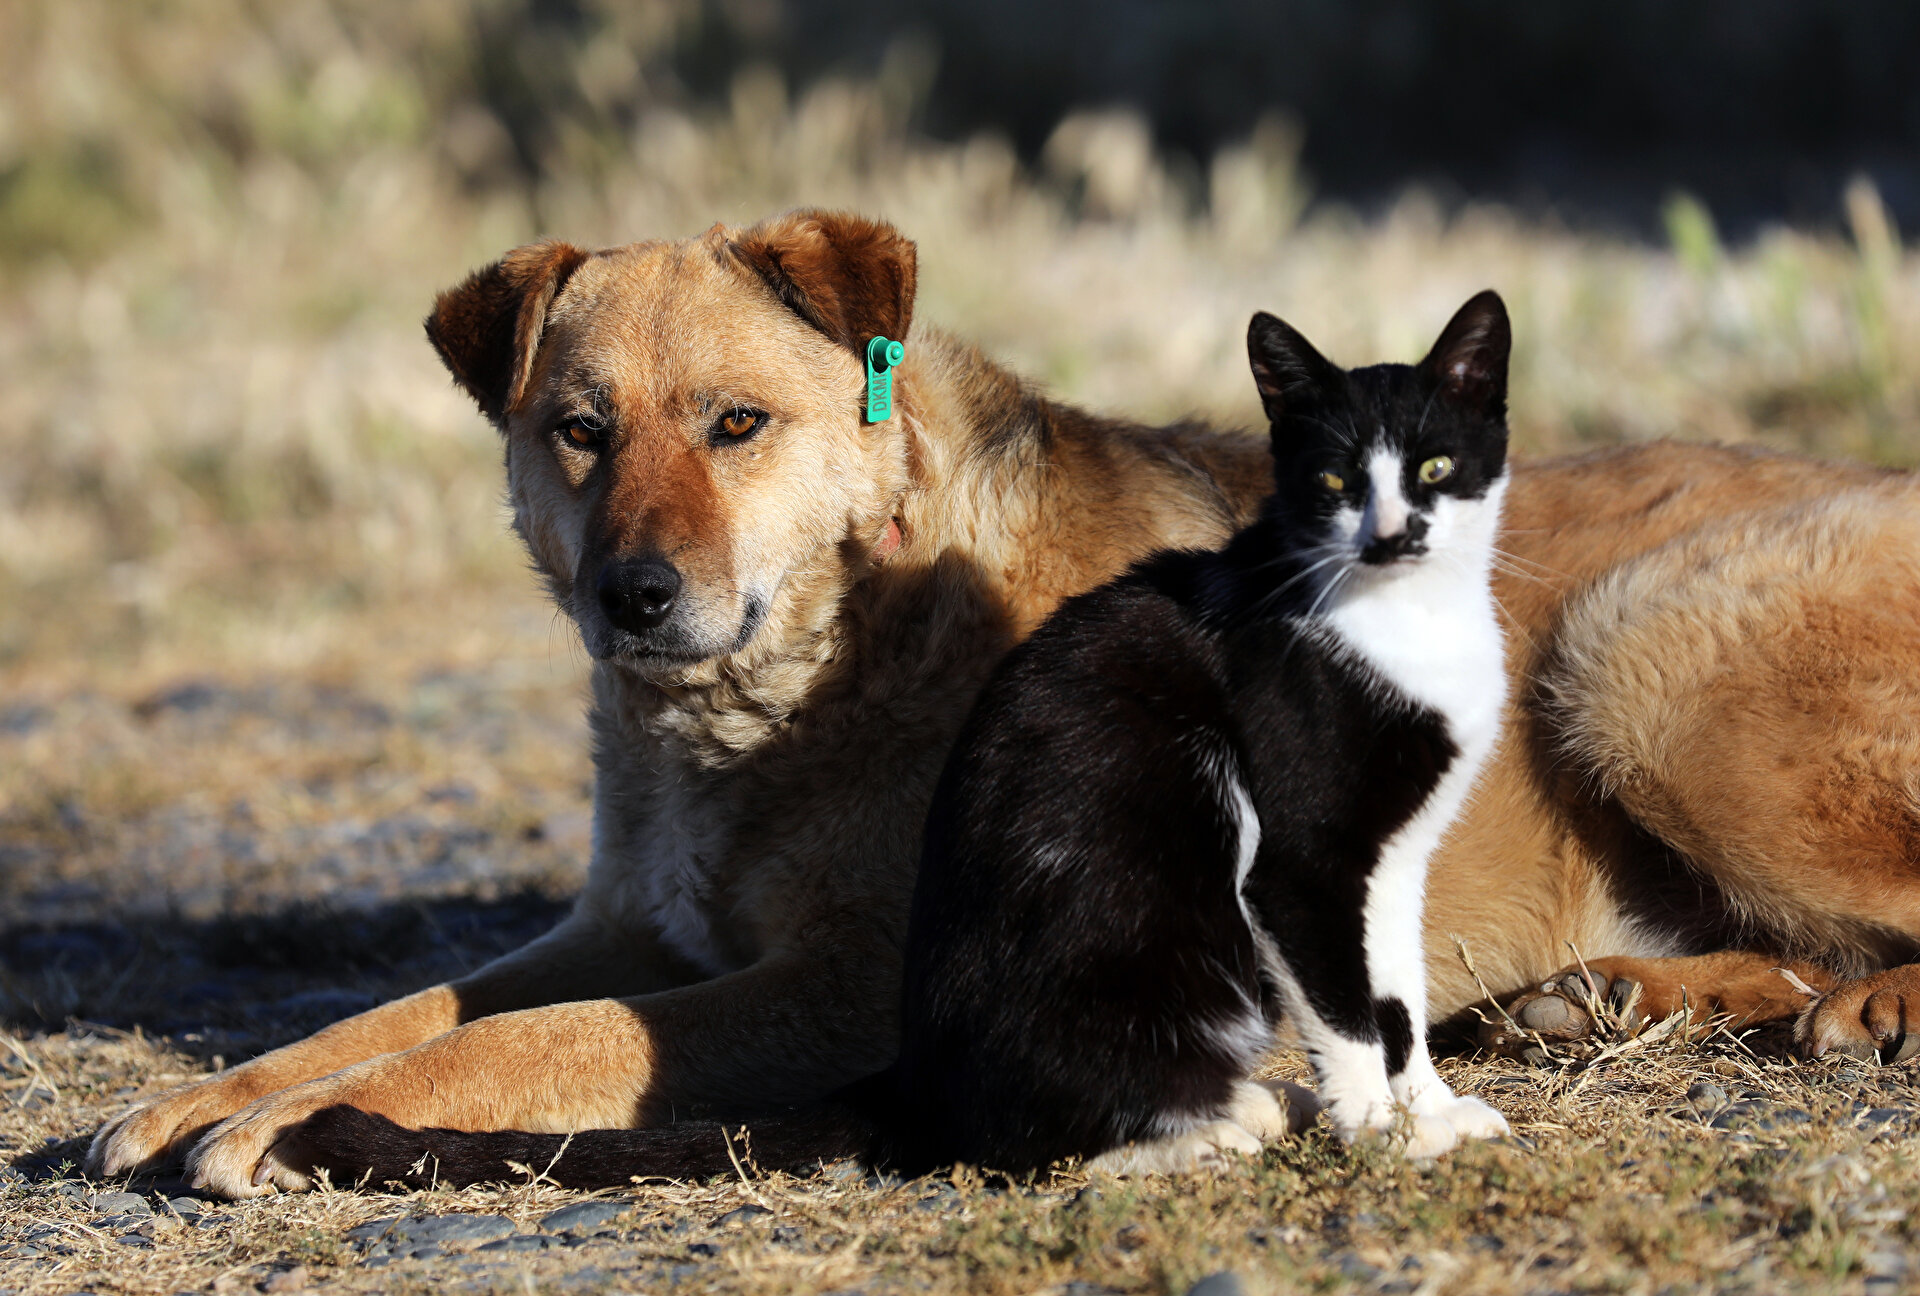 Adorable kitten strikes up funny friendship with dog in Turkey